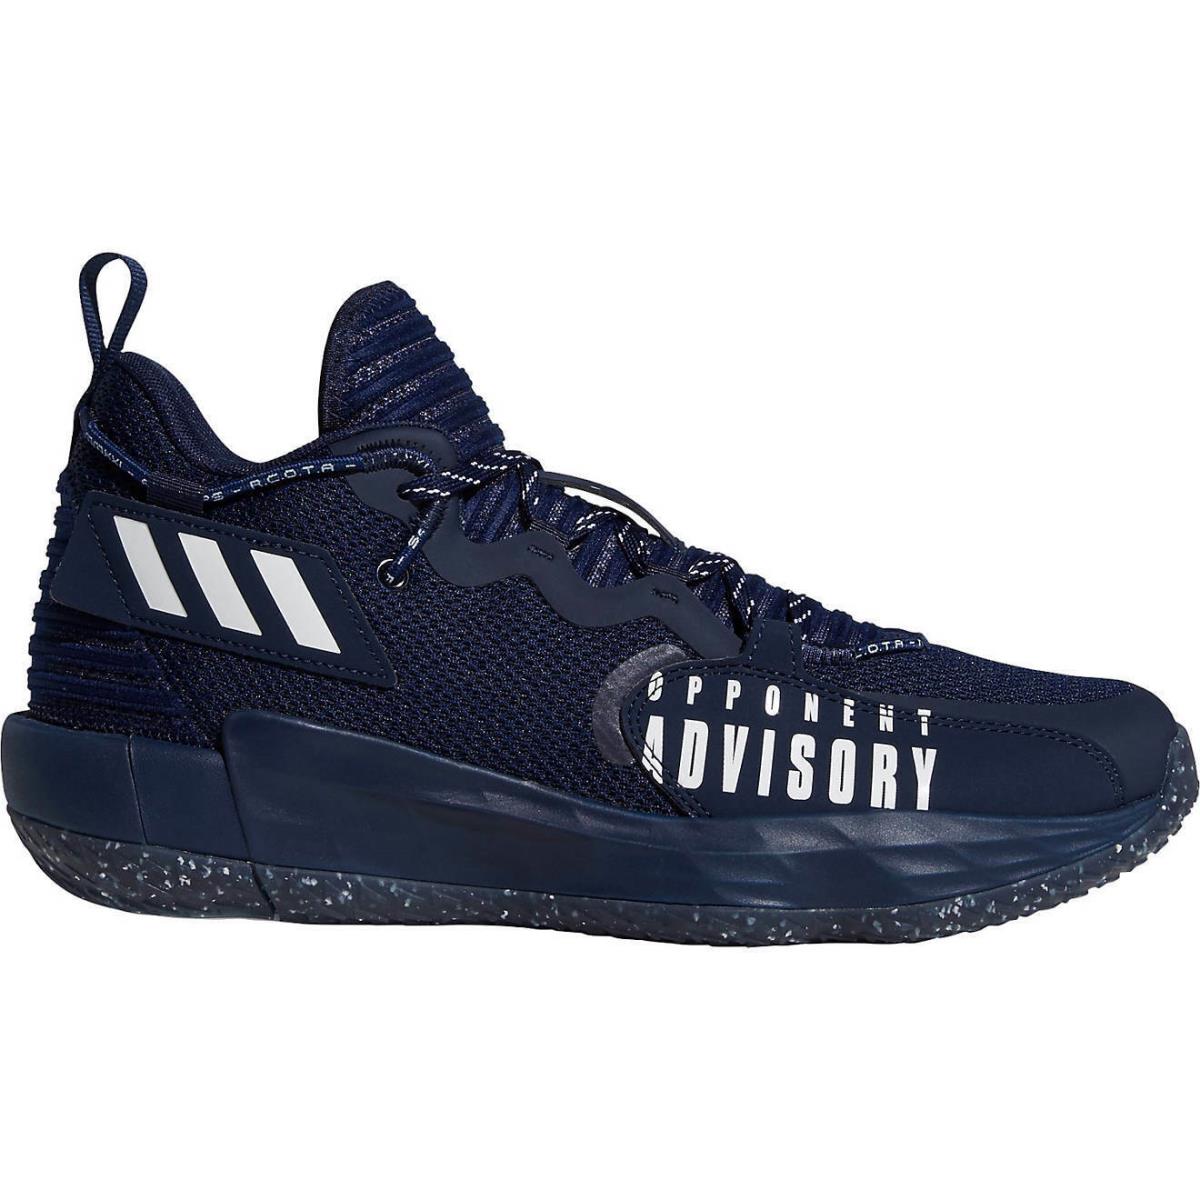 Mens Adidas Dame 7 Extply Basketball Shoes Sneakers Navy Blue White H68988